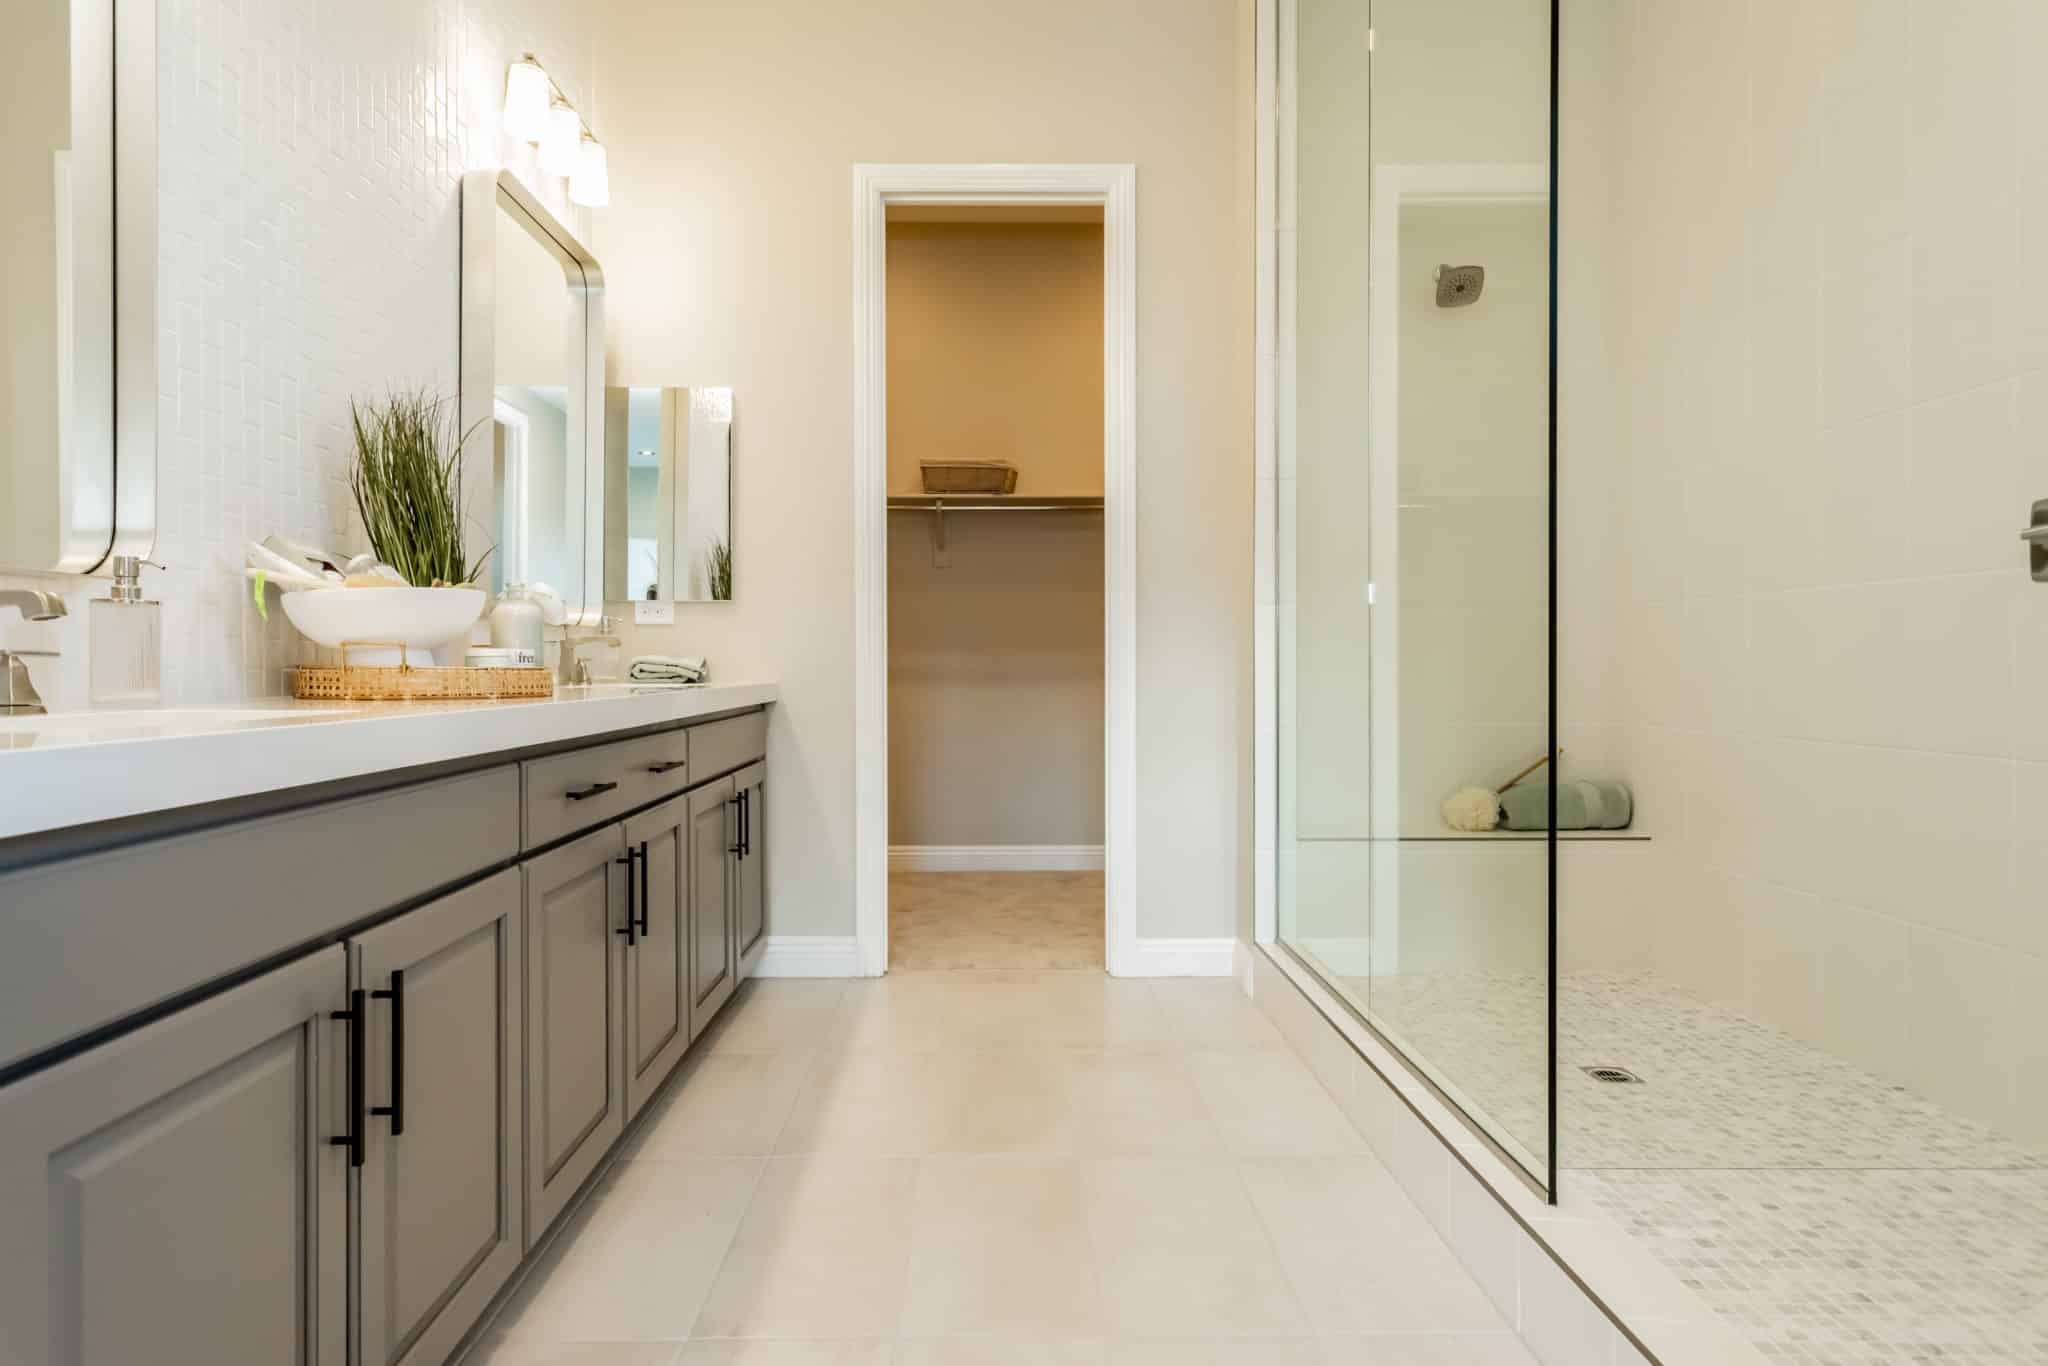 Primary Bathroom of Merlin Plan 2 at Falcon Crest by Woodside